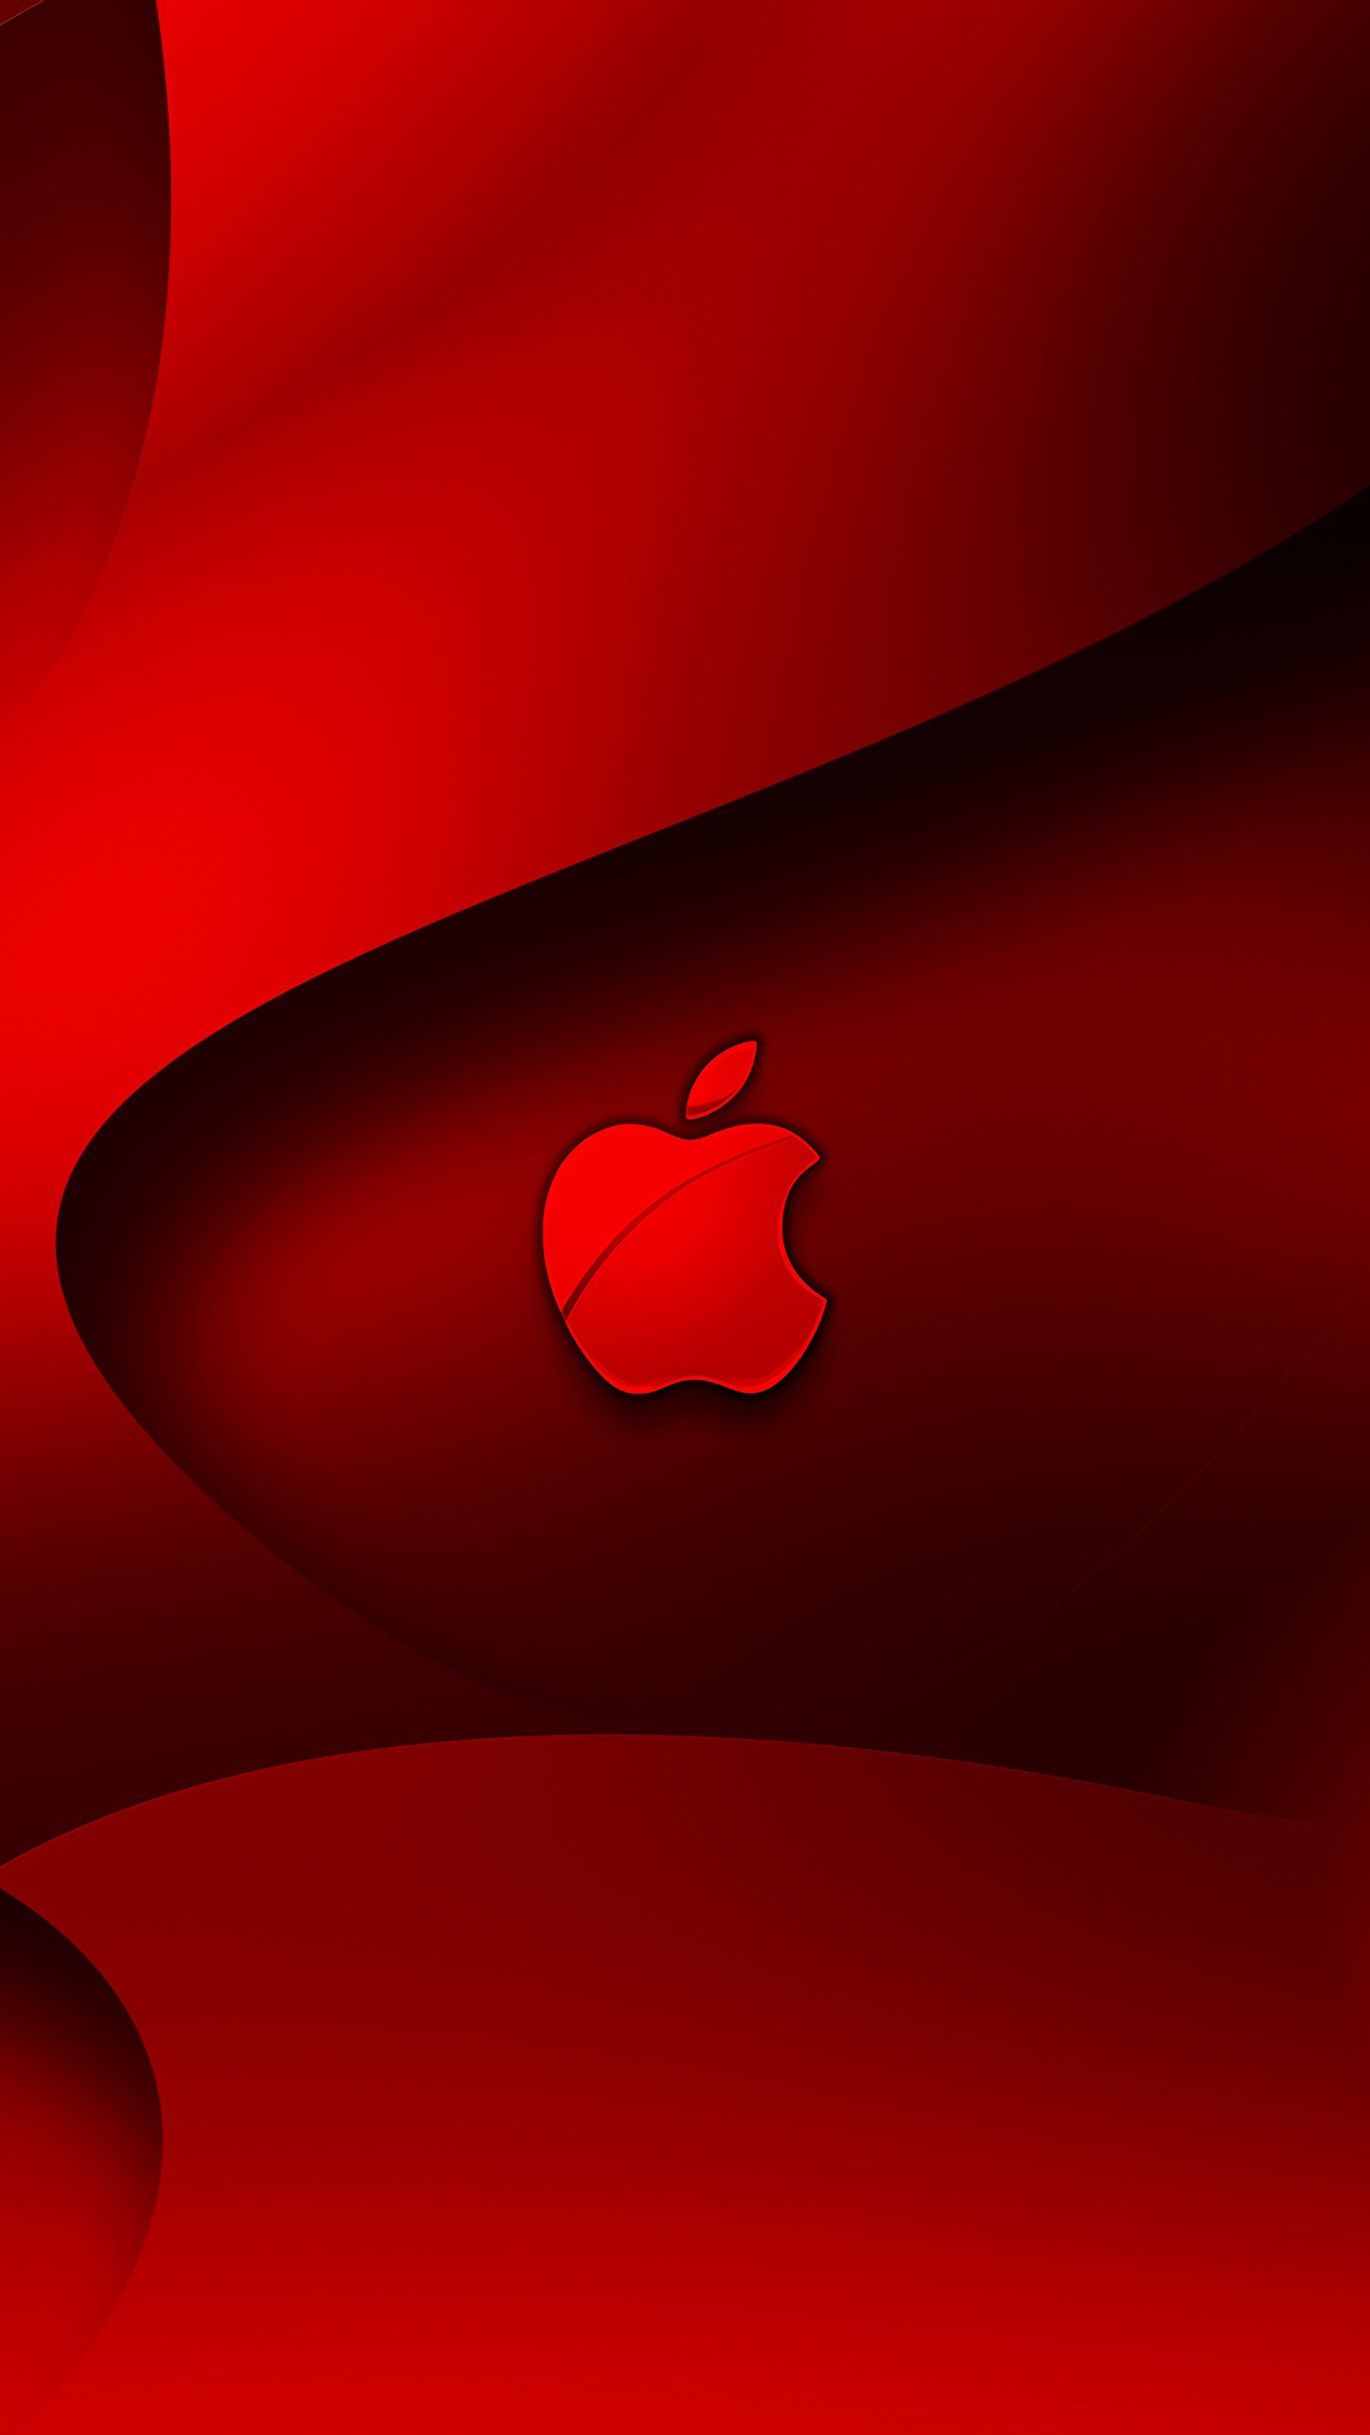 I See Red download the new for apple